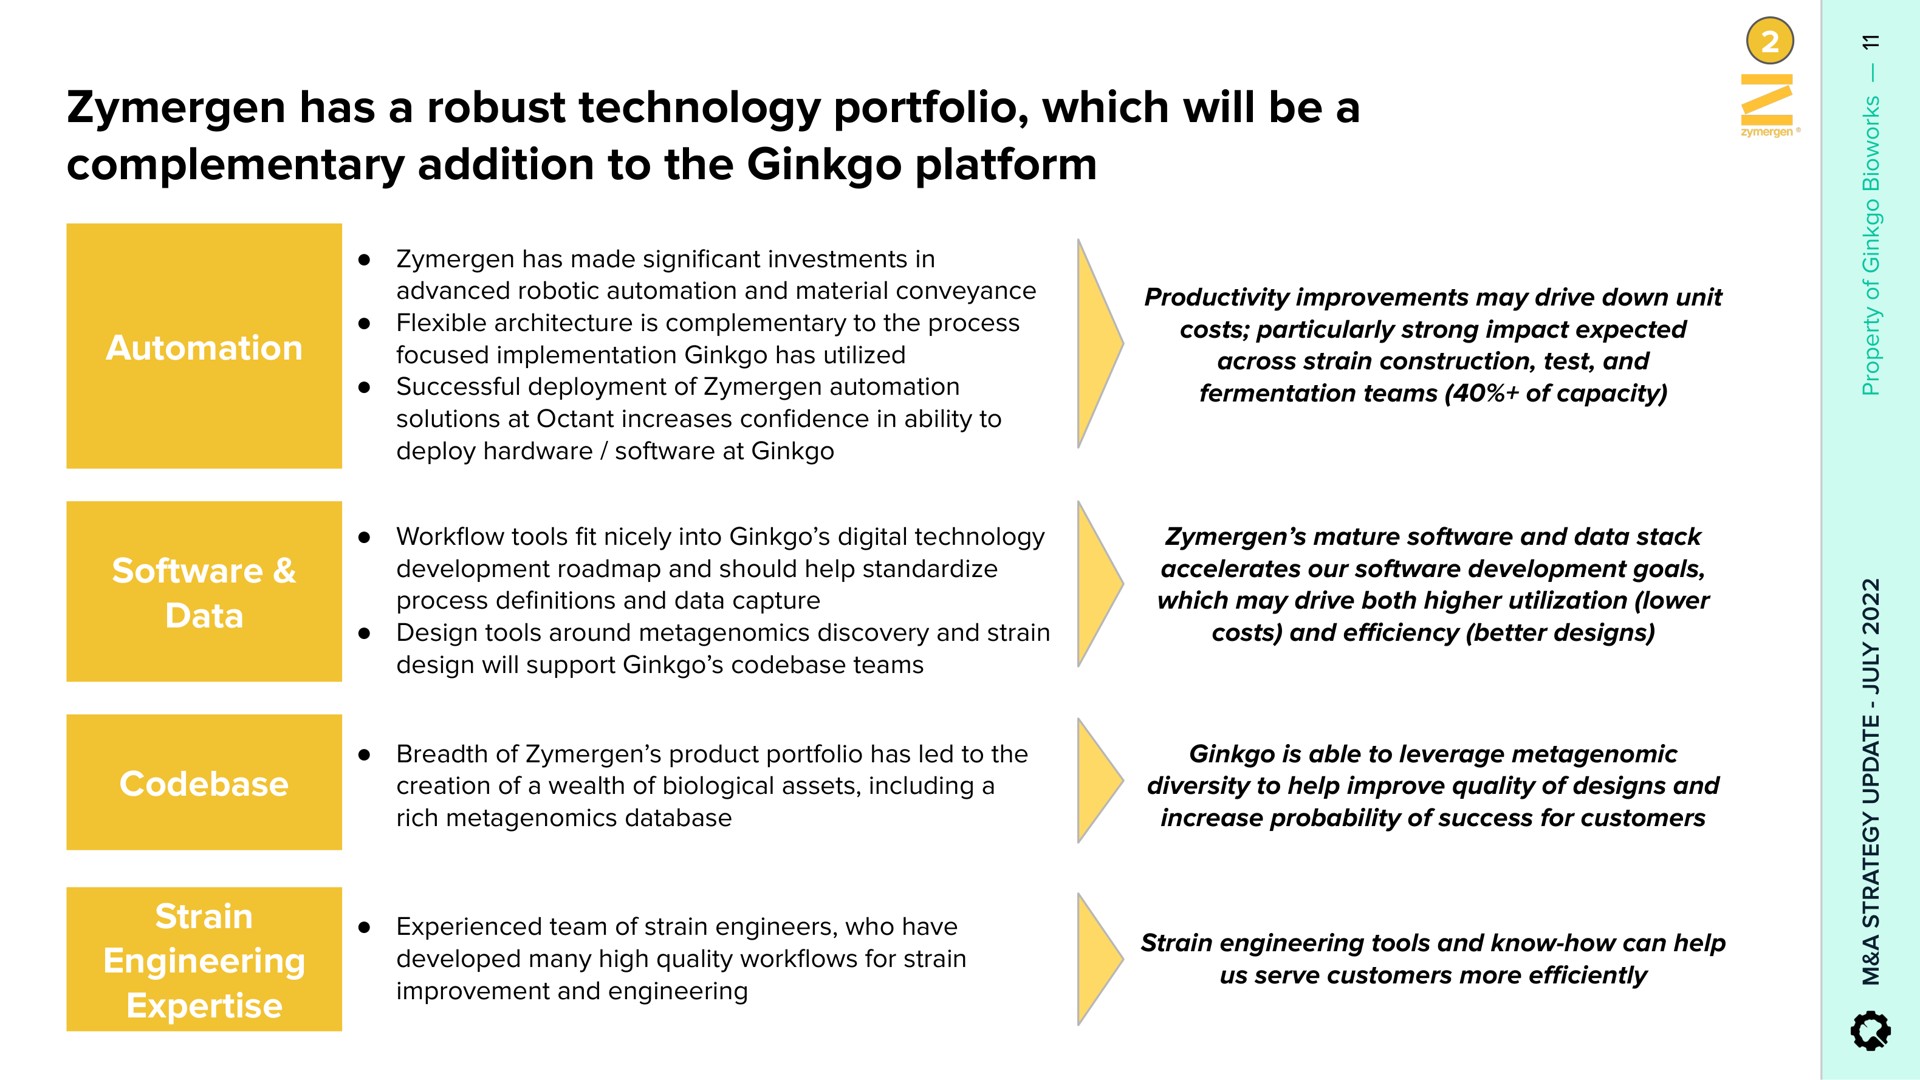 has a robust technology portfolio which will be a complementary addition to the ginkgo platform | Ginkgo